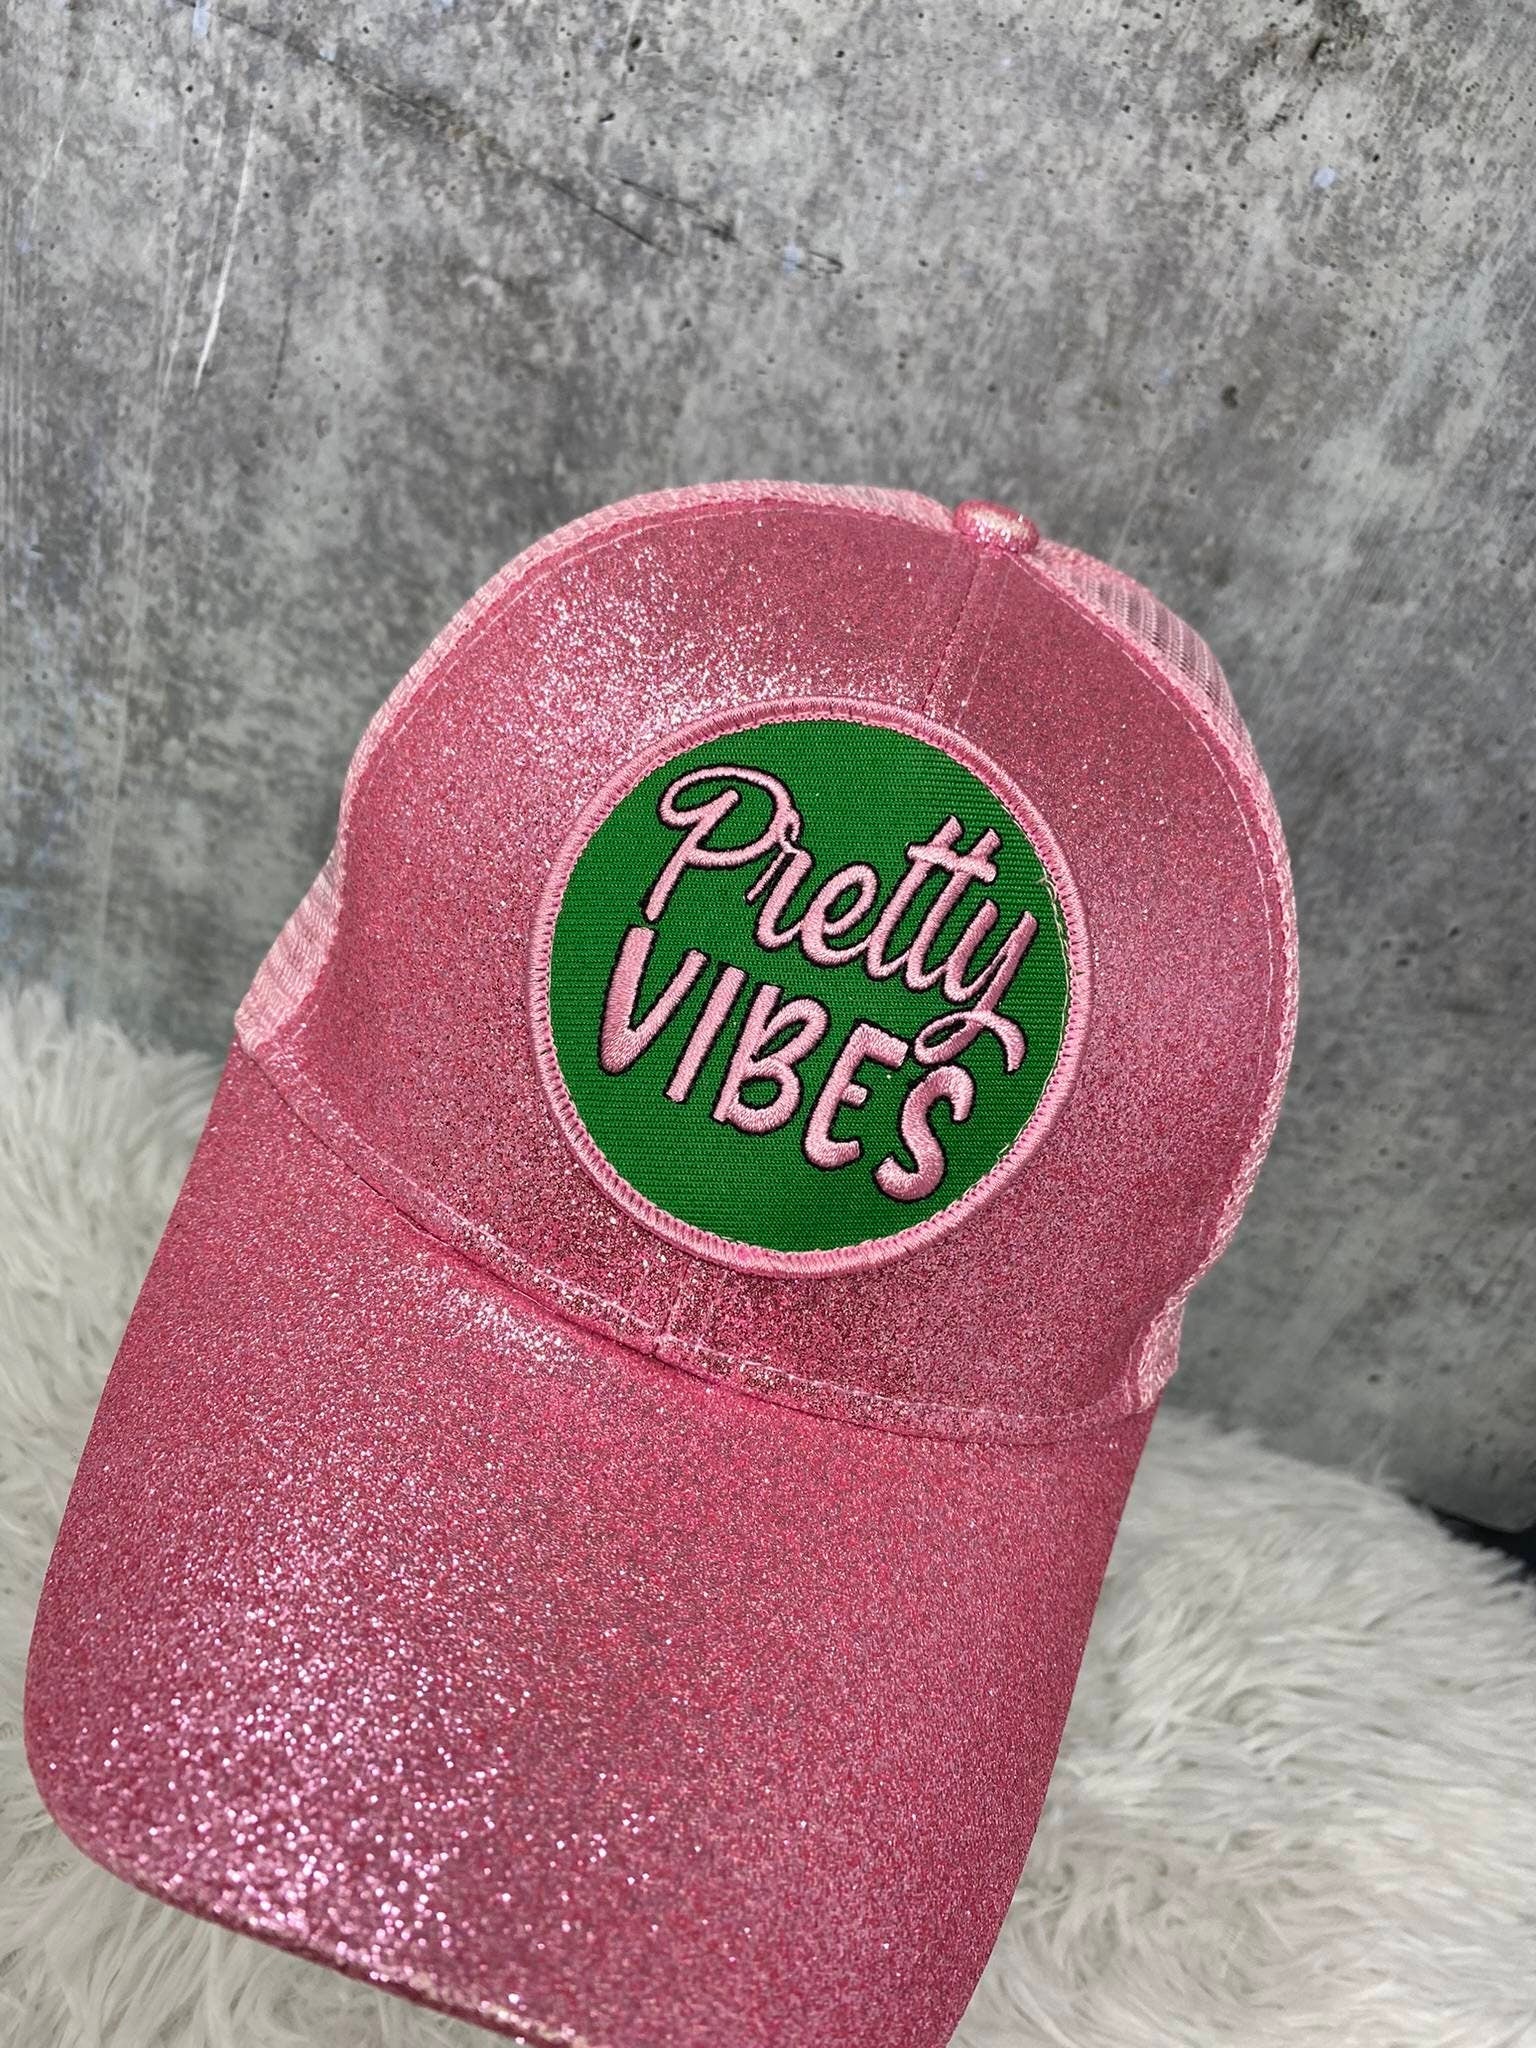 Pink & Green,"Pretty Vibes" Glitter Messy Bun/Ponytail Hat, Sparkling Bad Hair Day Hat, Gifts for Sorority Girl, Cute Summer Hat w/Patch